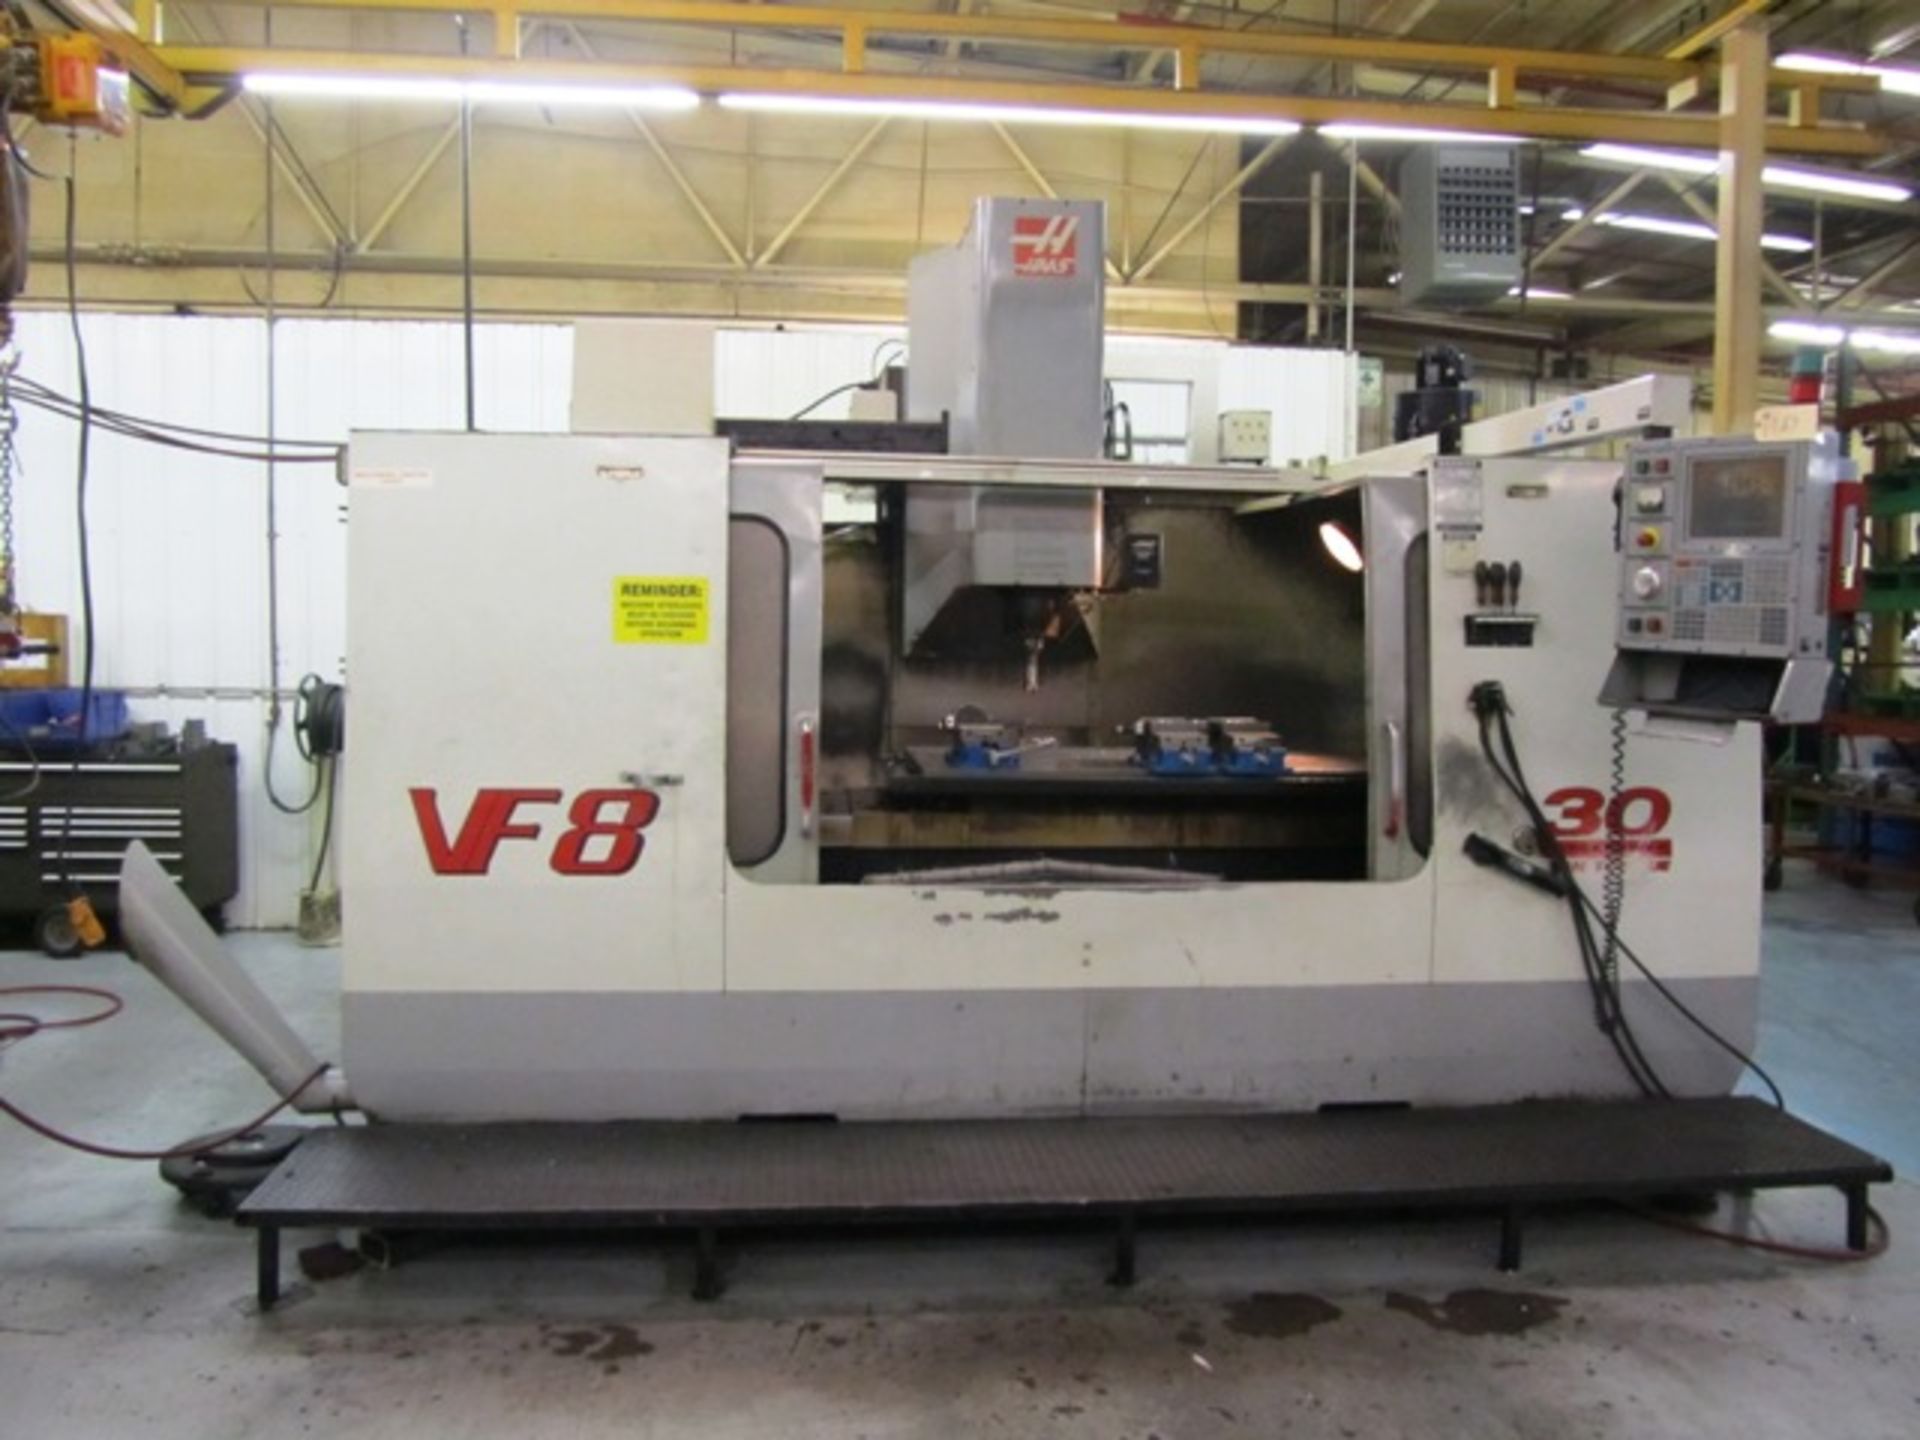 Haas VF8 CNC Vertical Machining Center with 36'' x 64'' Table, #50 Taper Spindle Speeds to 5000 RPM,